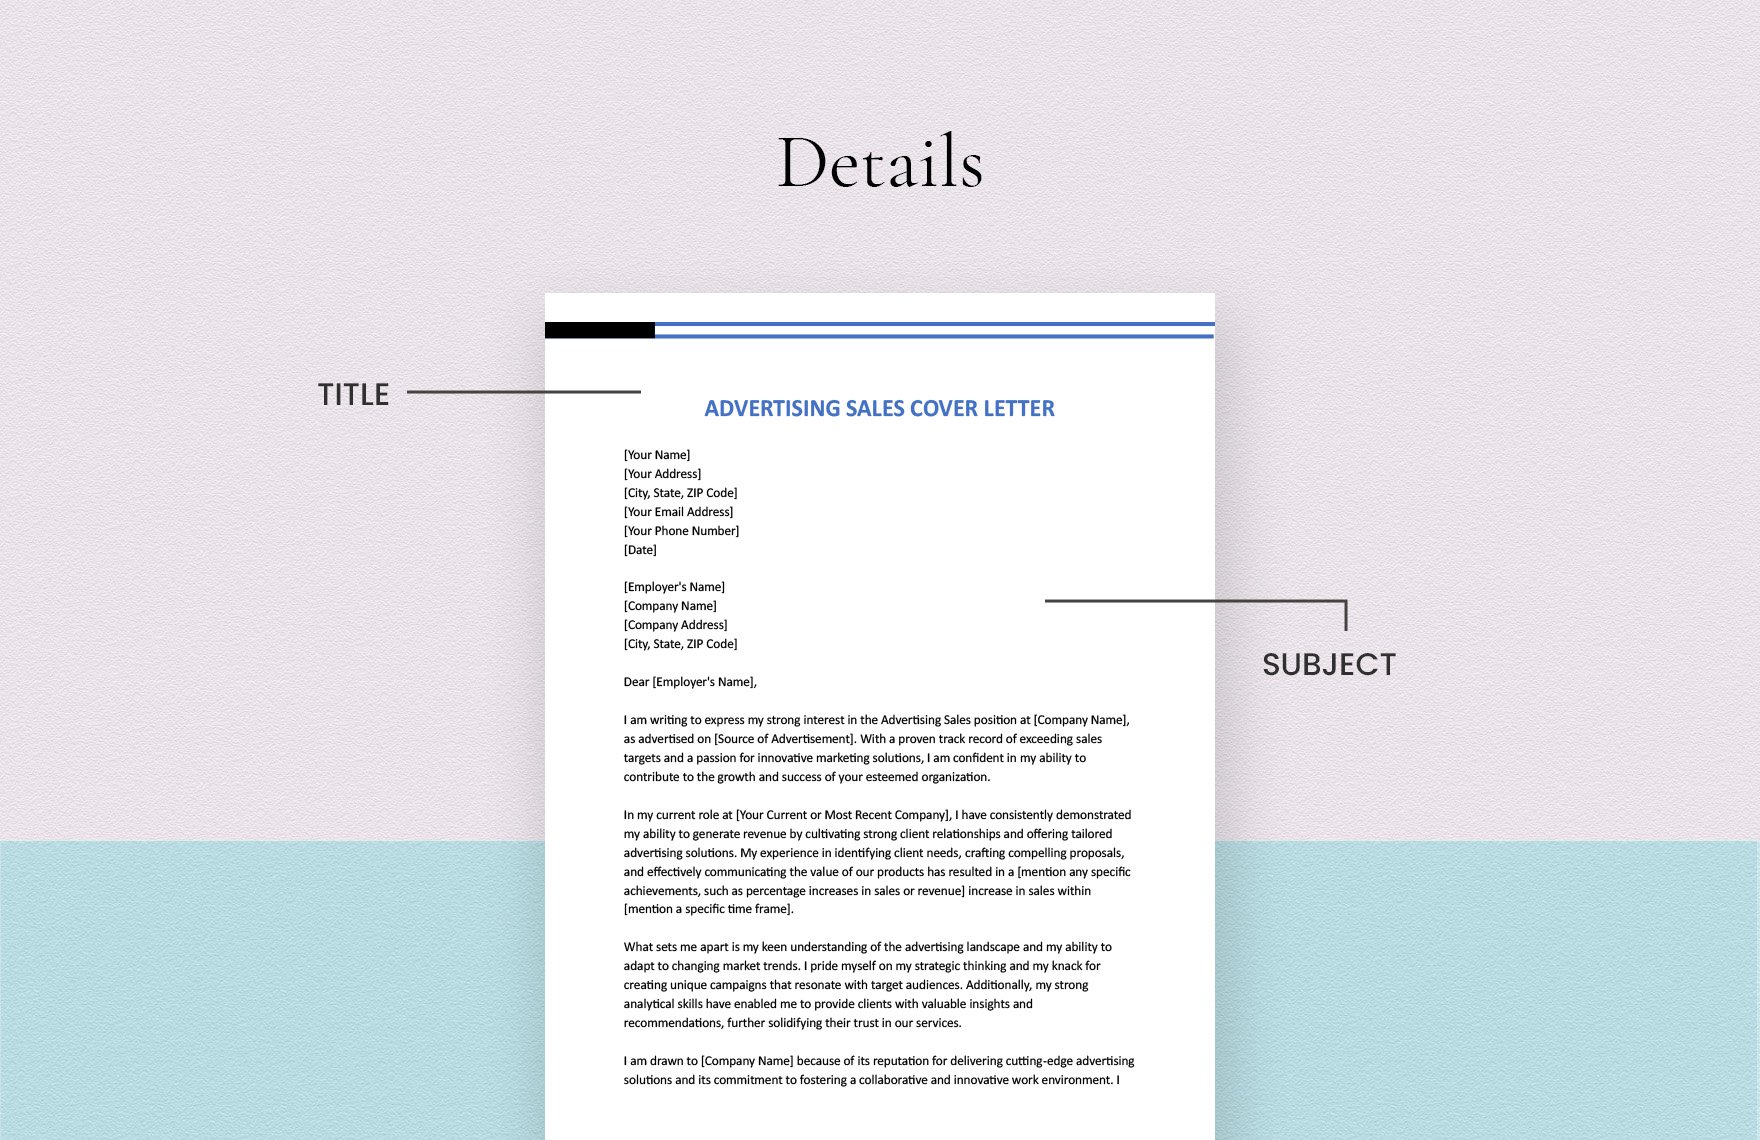 Advertising Sales Cover Letter